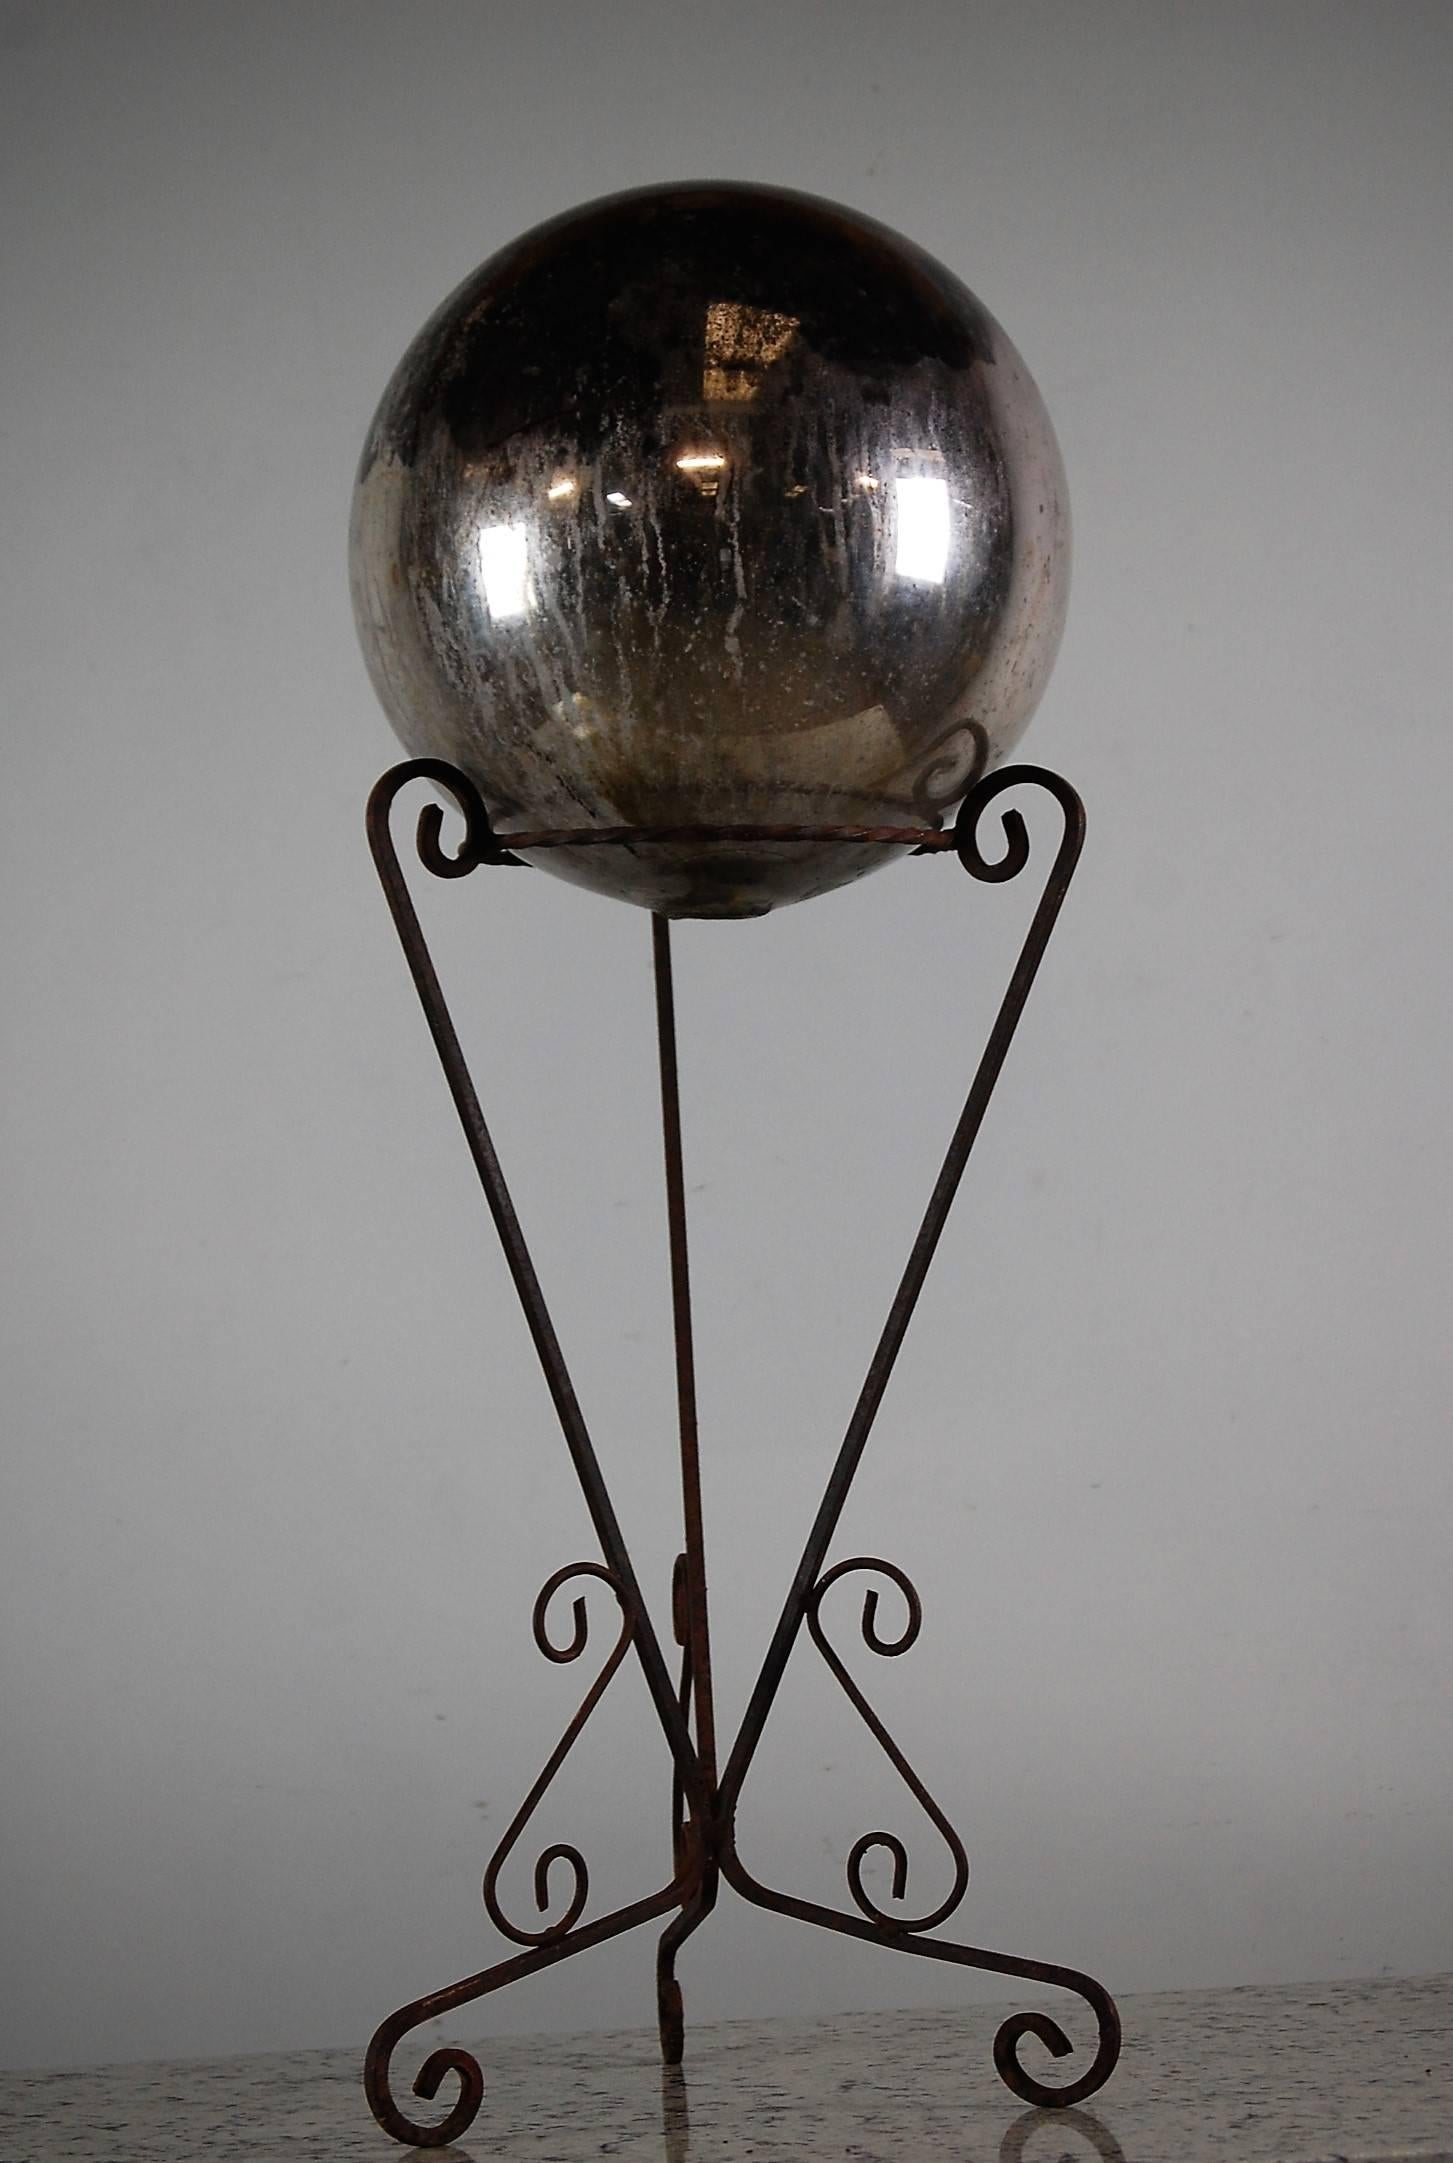 Large, heavily distressed handblown 19th century glass witches ball, the mirror is heavily distressed with approximately 50% Mirror covering remaining. Wonderful mysterious macabre look and feel. Later wrought iron stand.